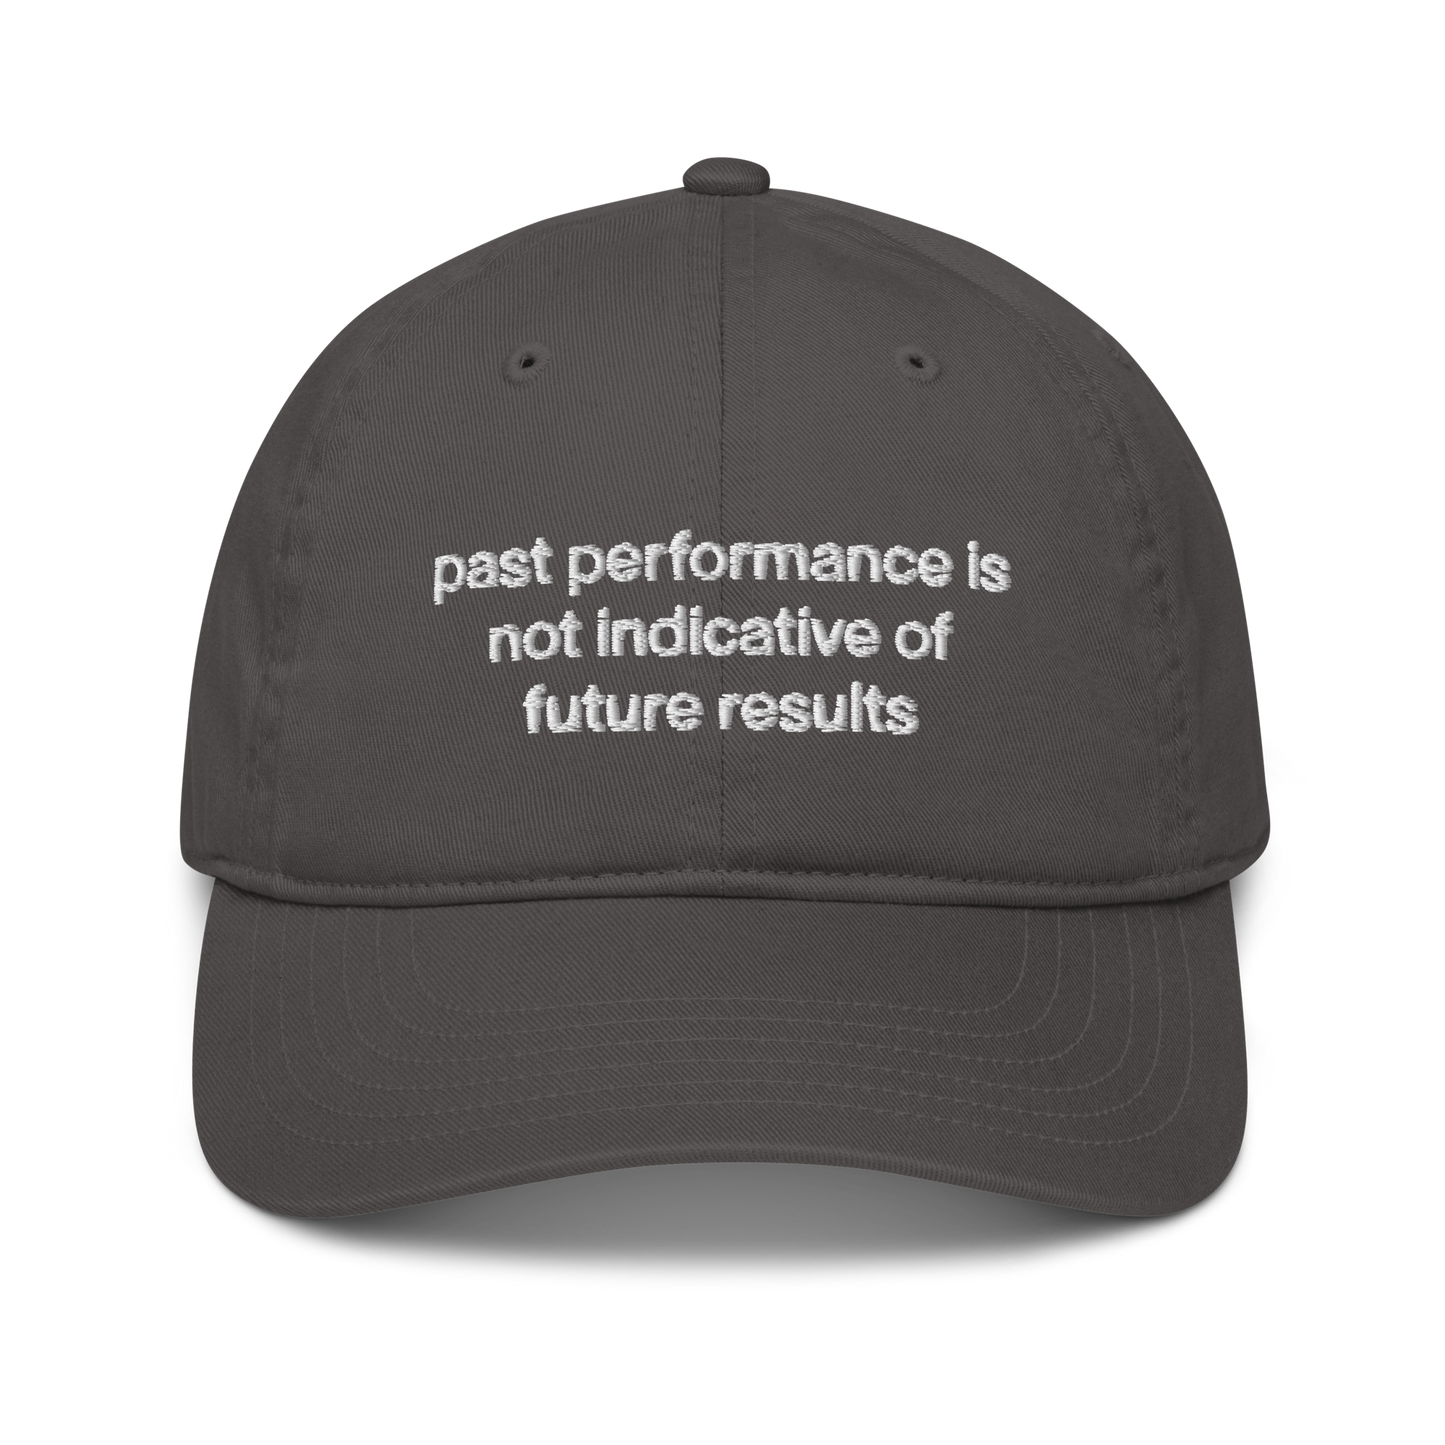 Past performance is not indicative of future results